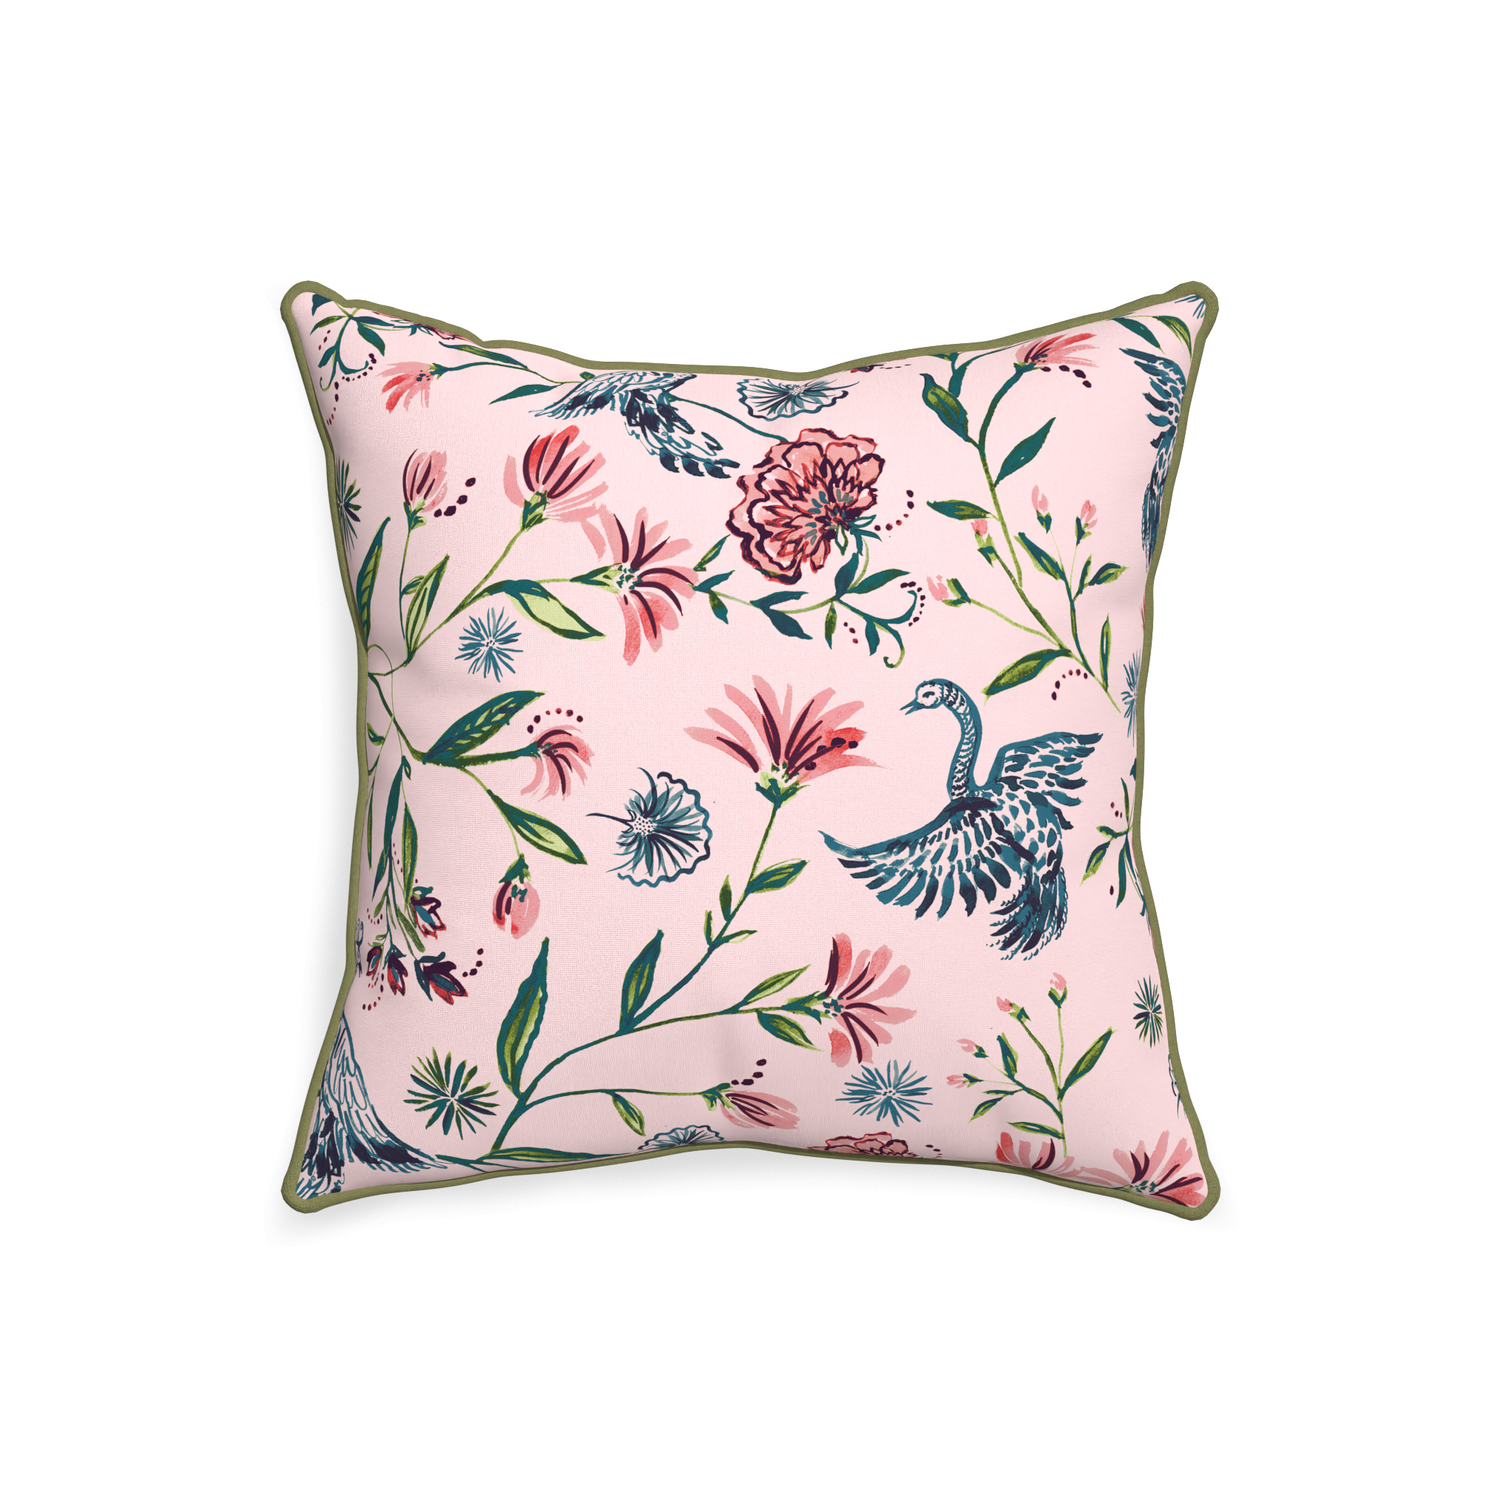 20-square daphne rose custom pillow with moss piping on white background